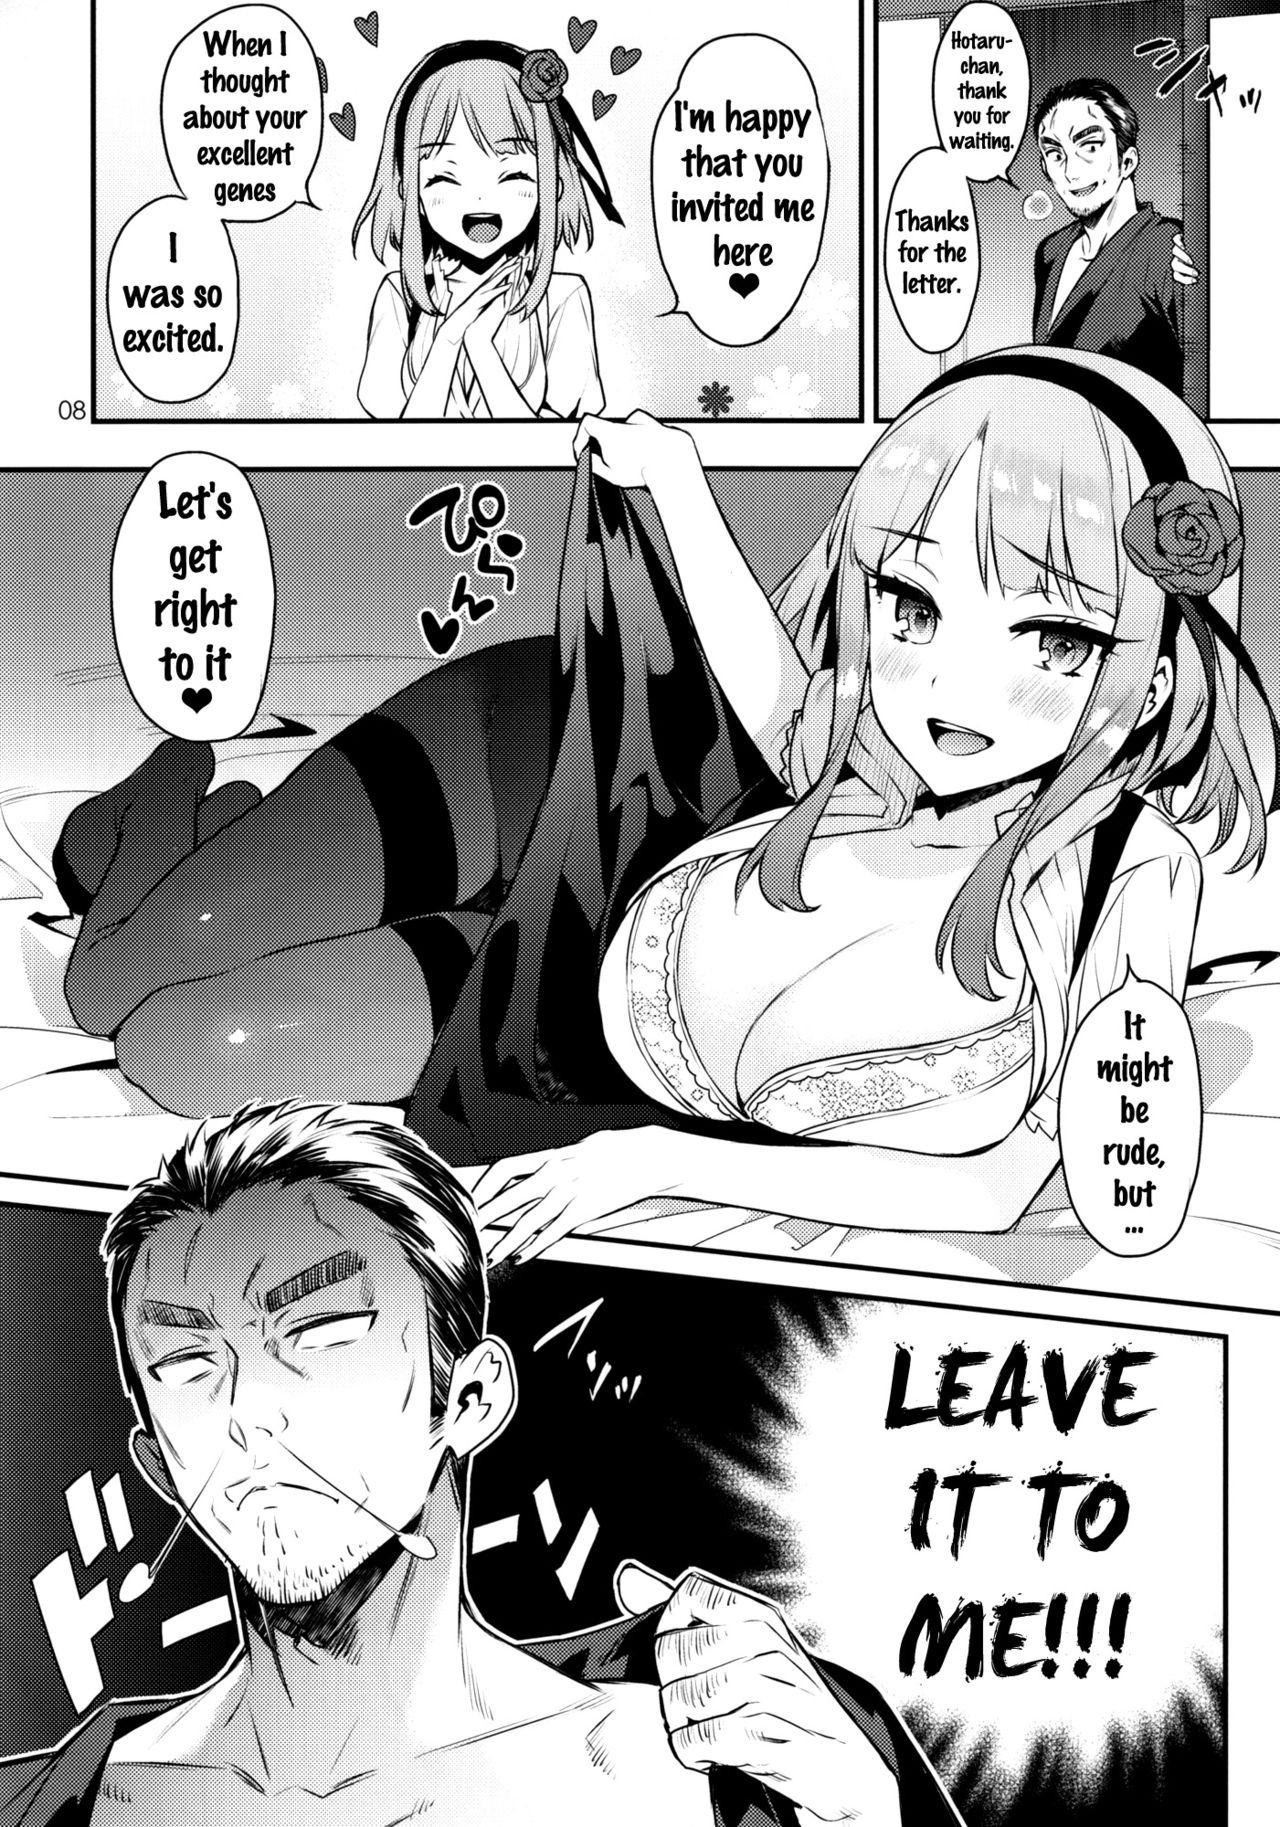 All Sweet Love Letter - Dagashi kashi Sixtynine - Page 7